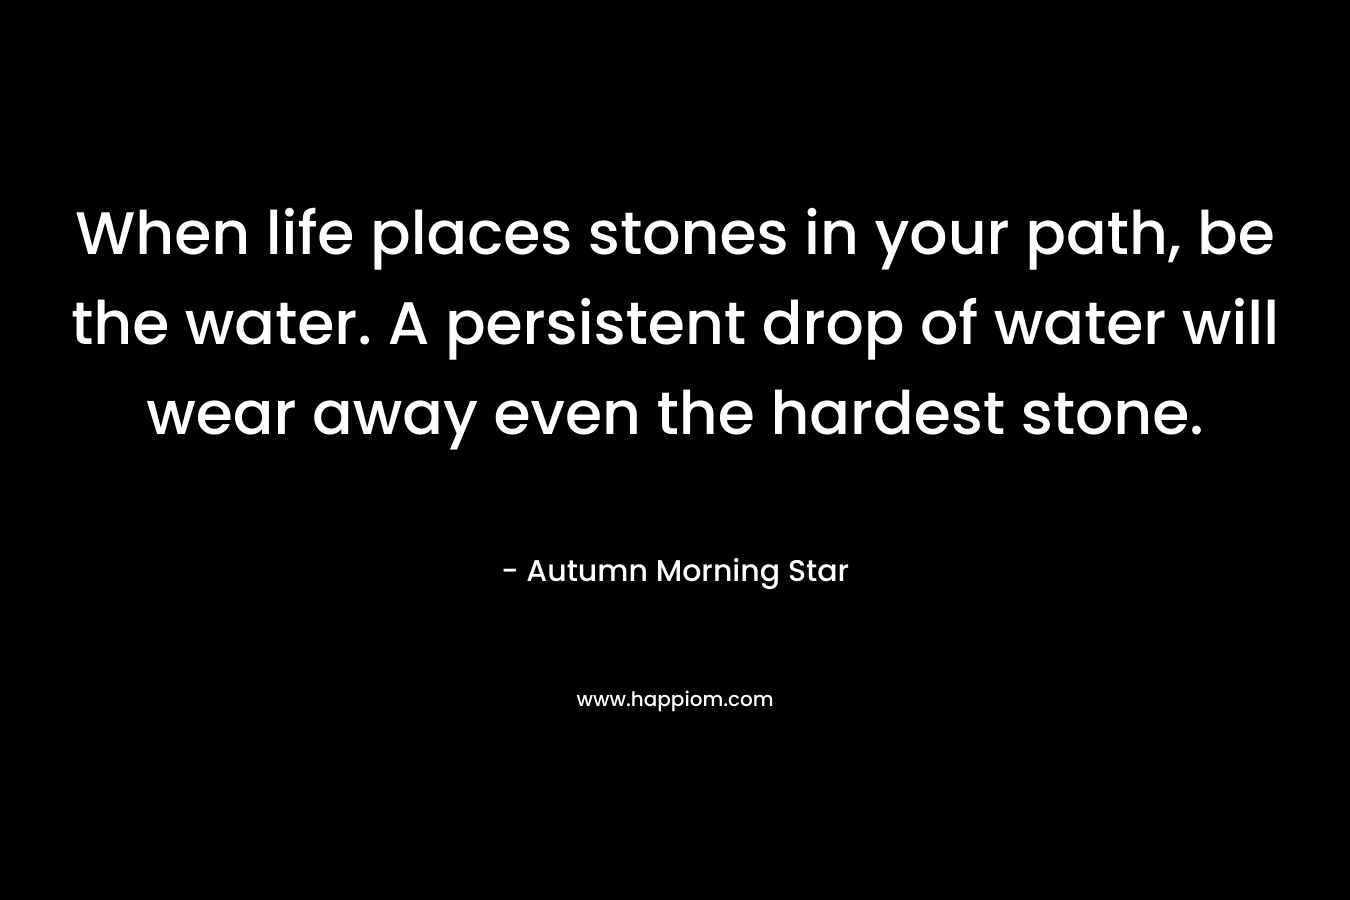 When life places stones in your path, be the water. A persistent drop of water will wear away even the hardest stone. – Autumn Morning Star